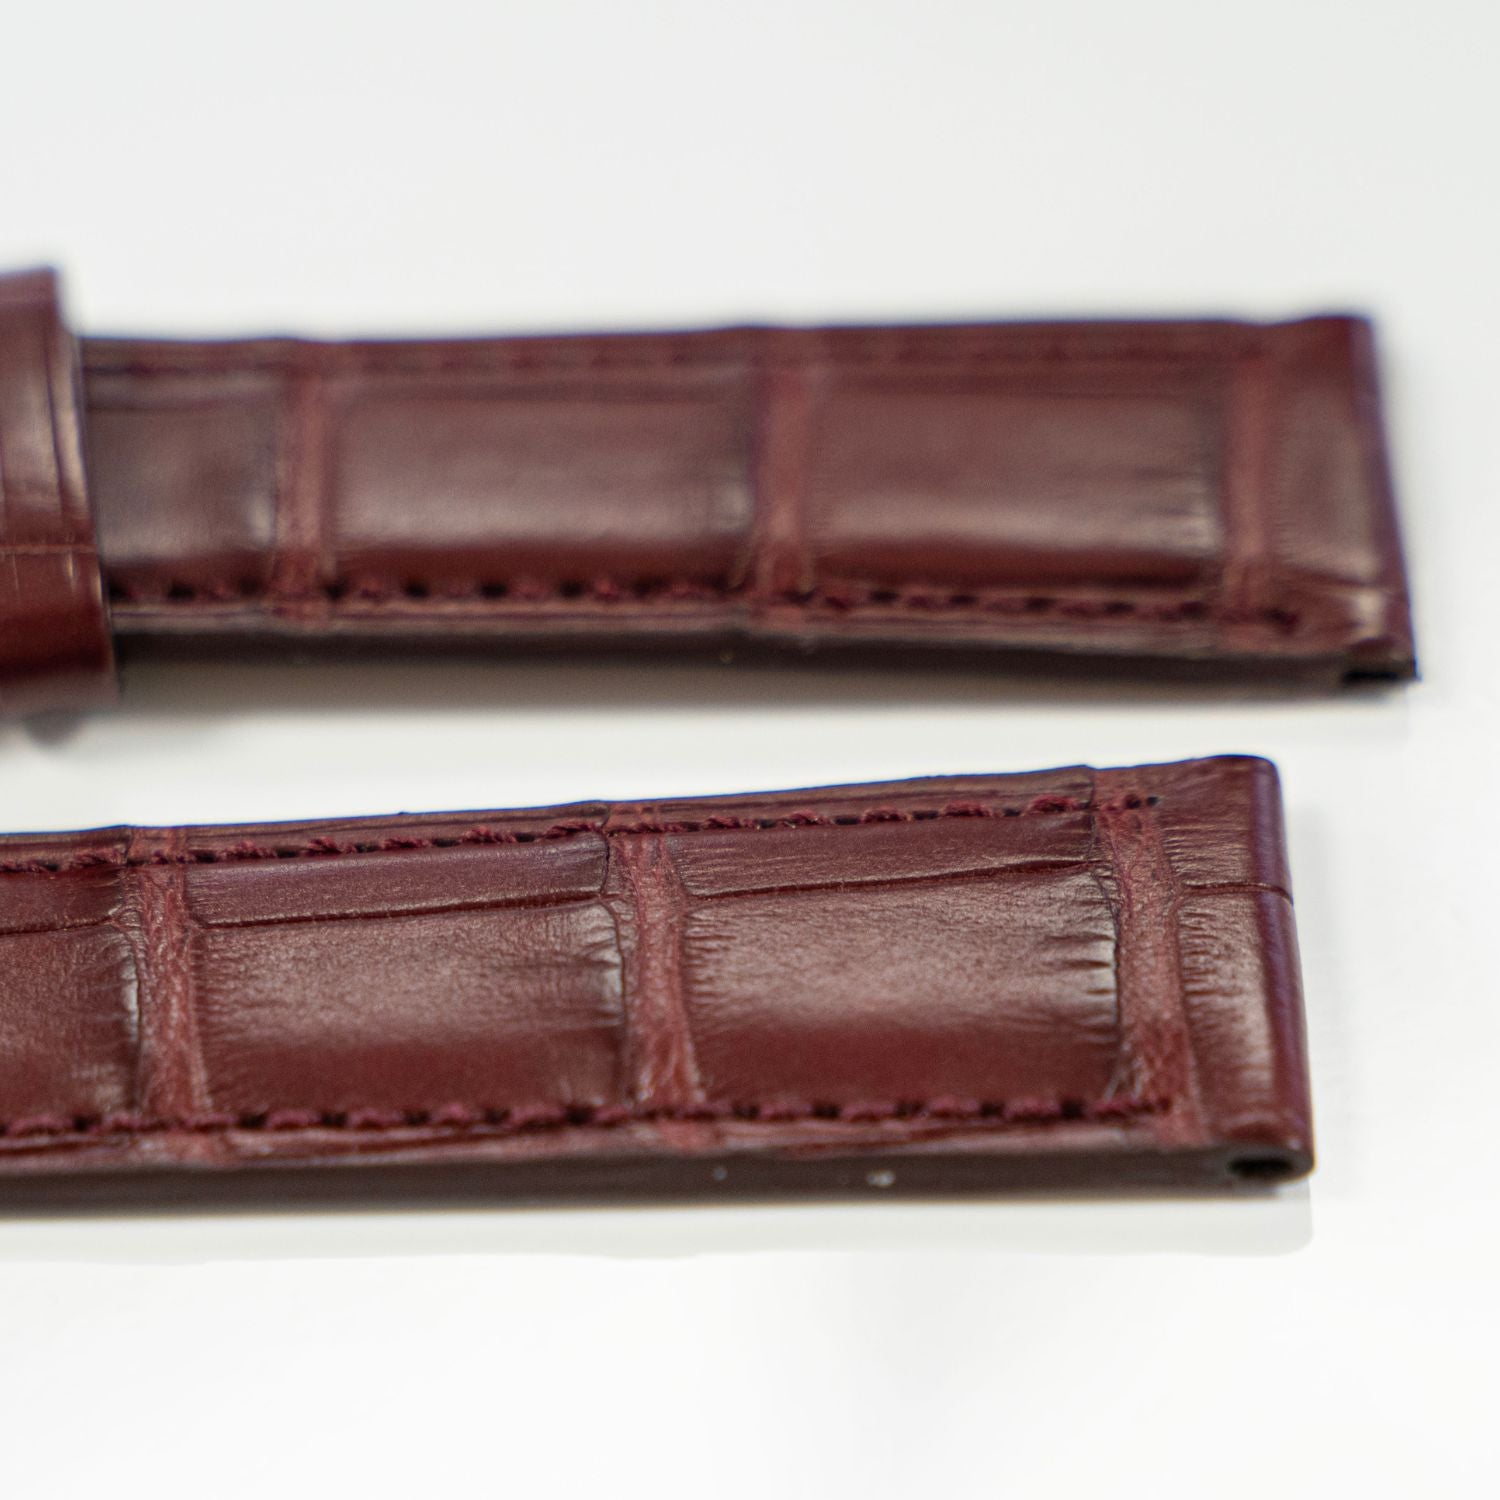 Alligator Leather for the Models of Cartier Watch straps 